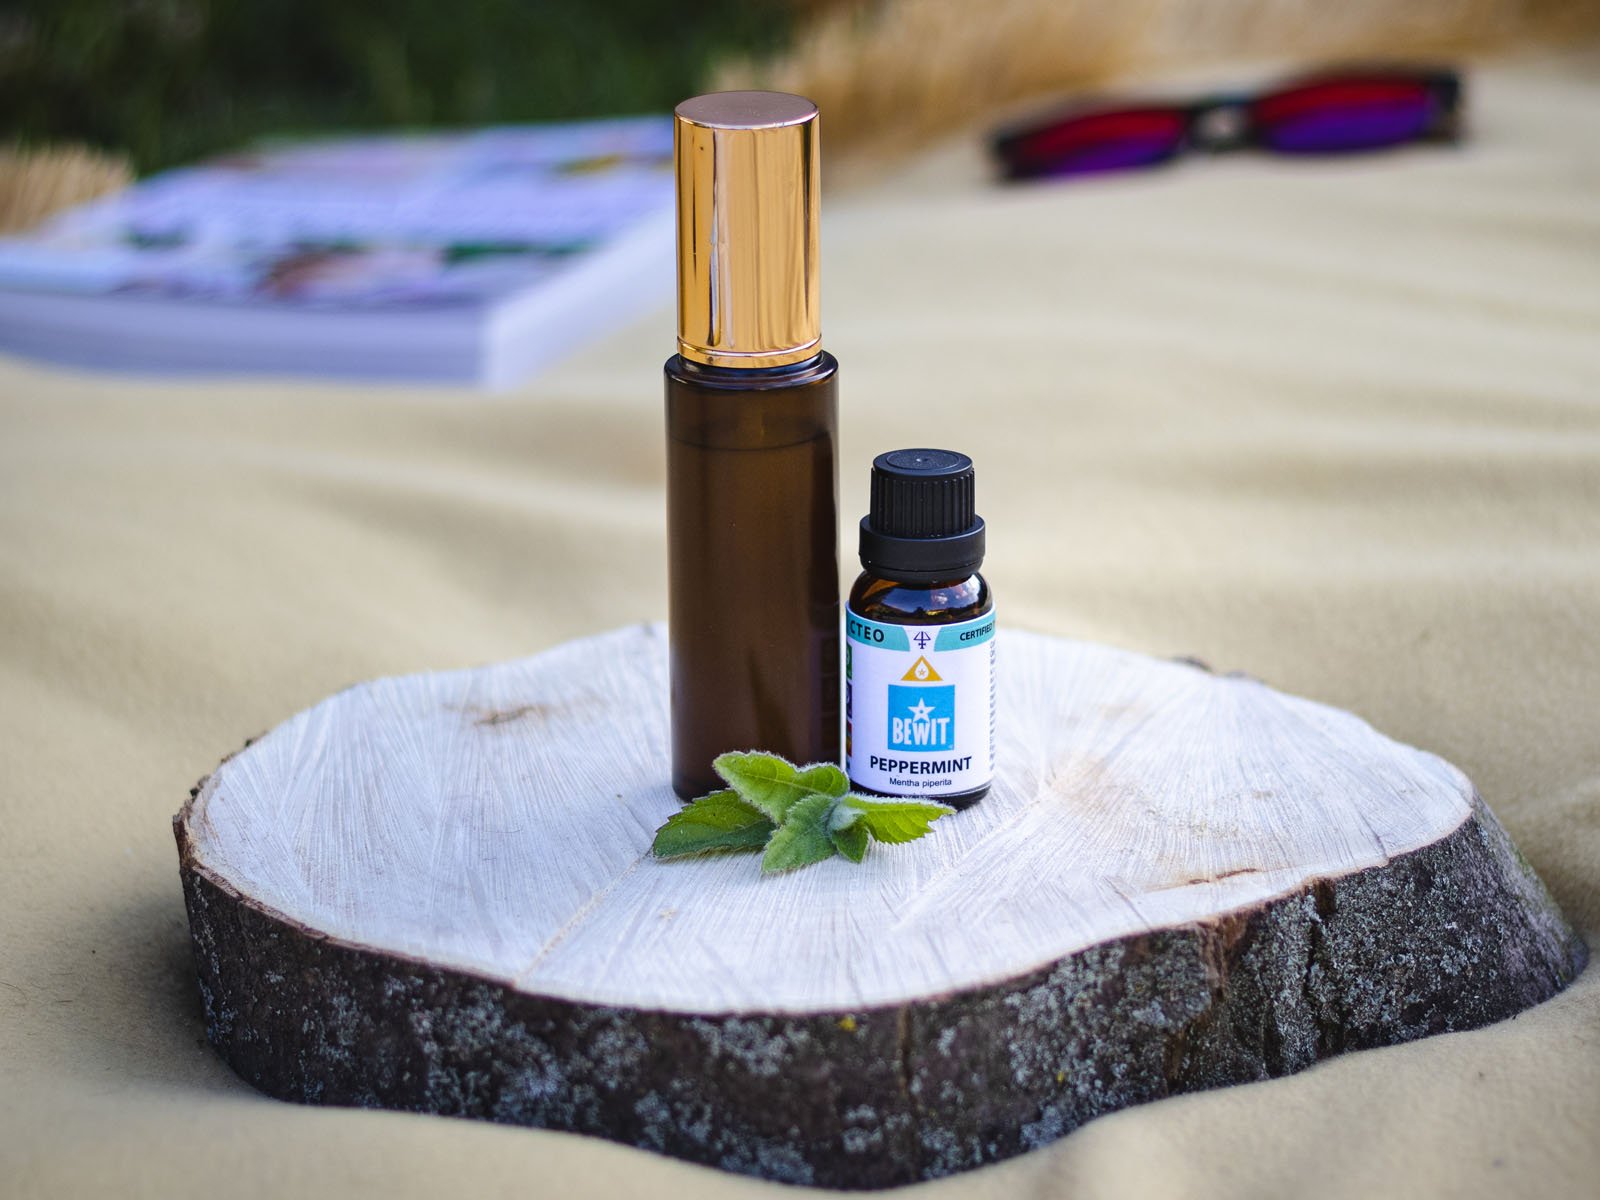 Peppermint - It is a 100% pure essential oil - 5